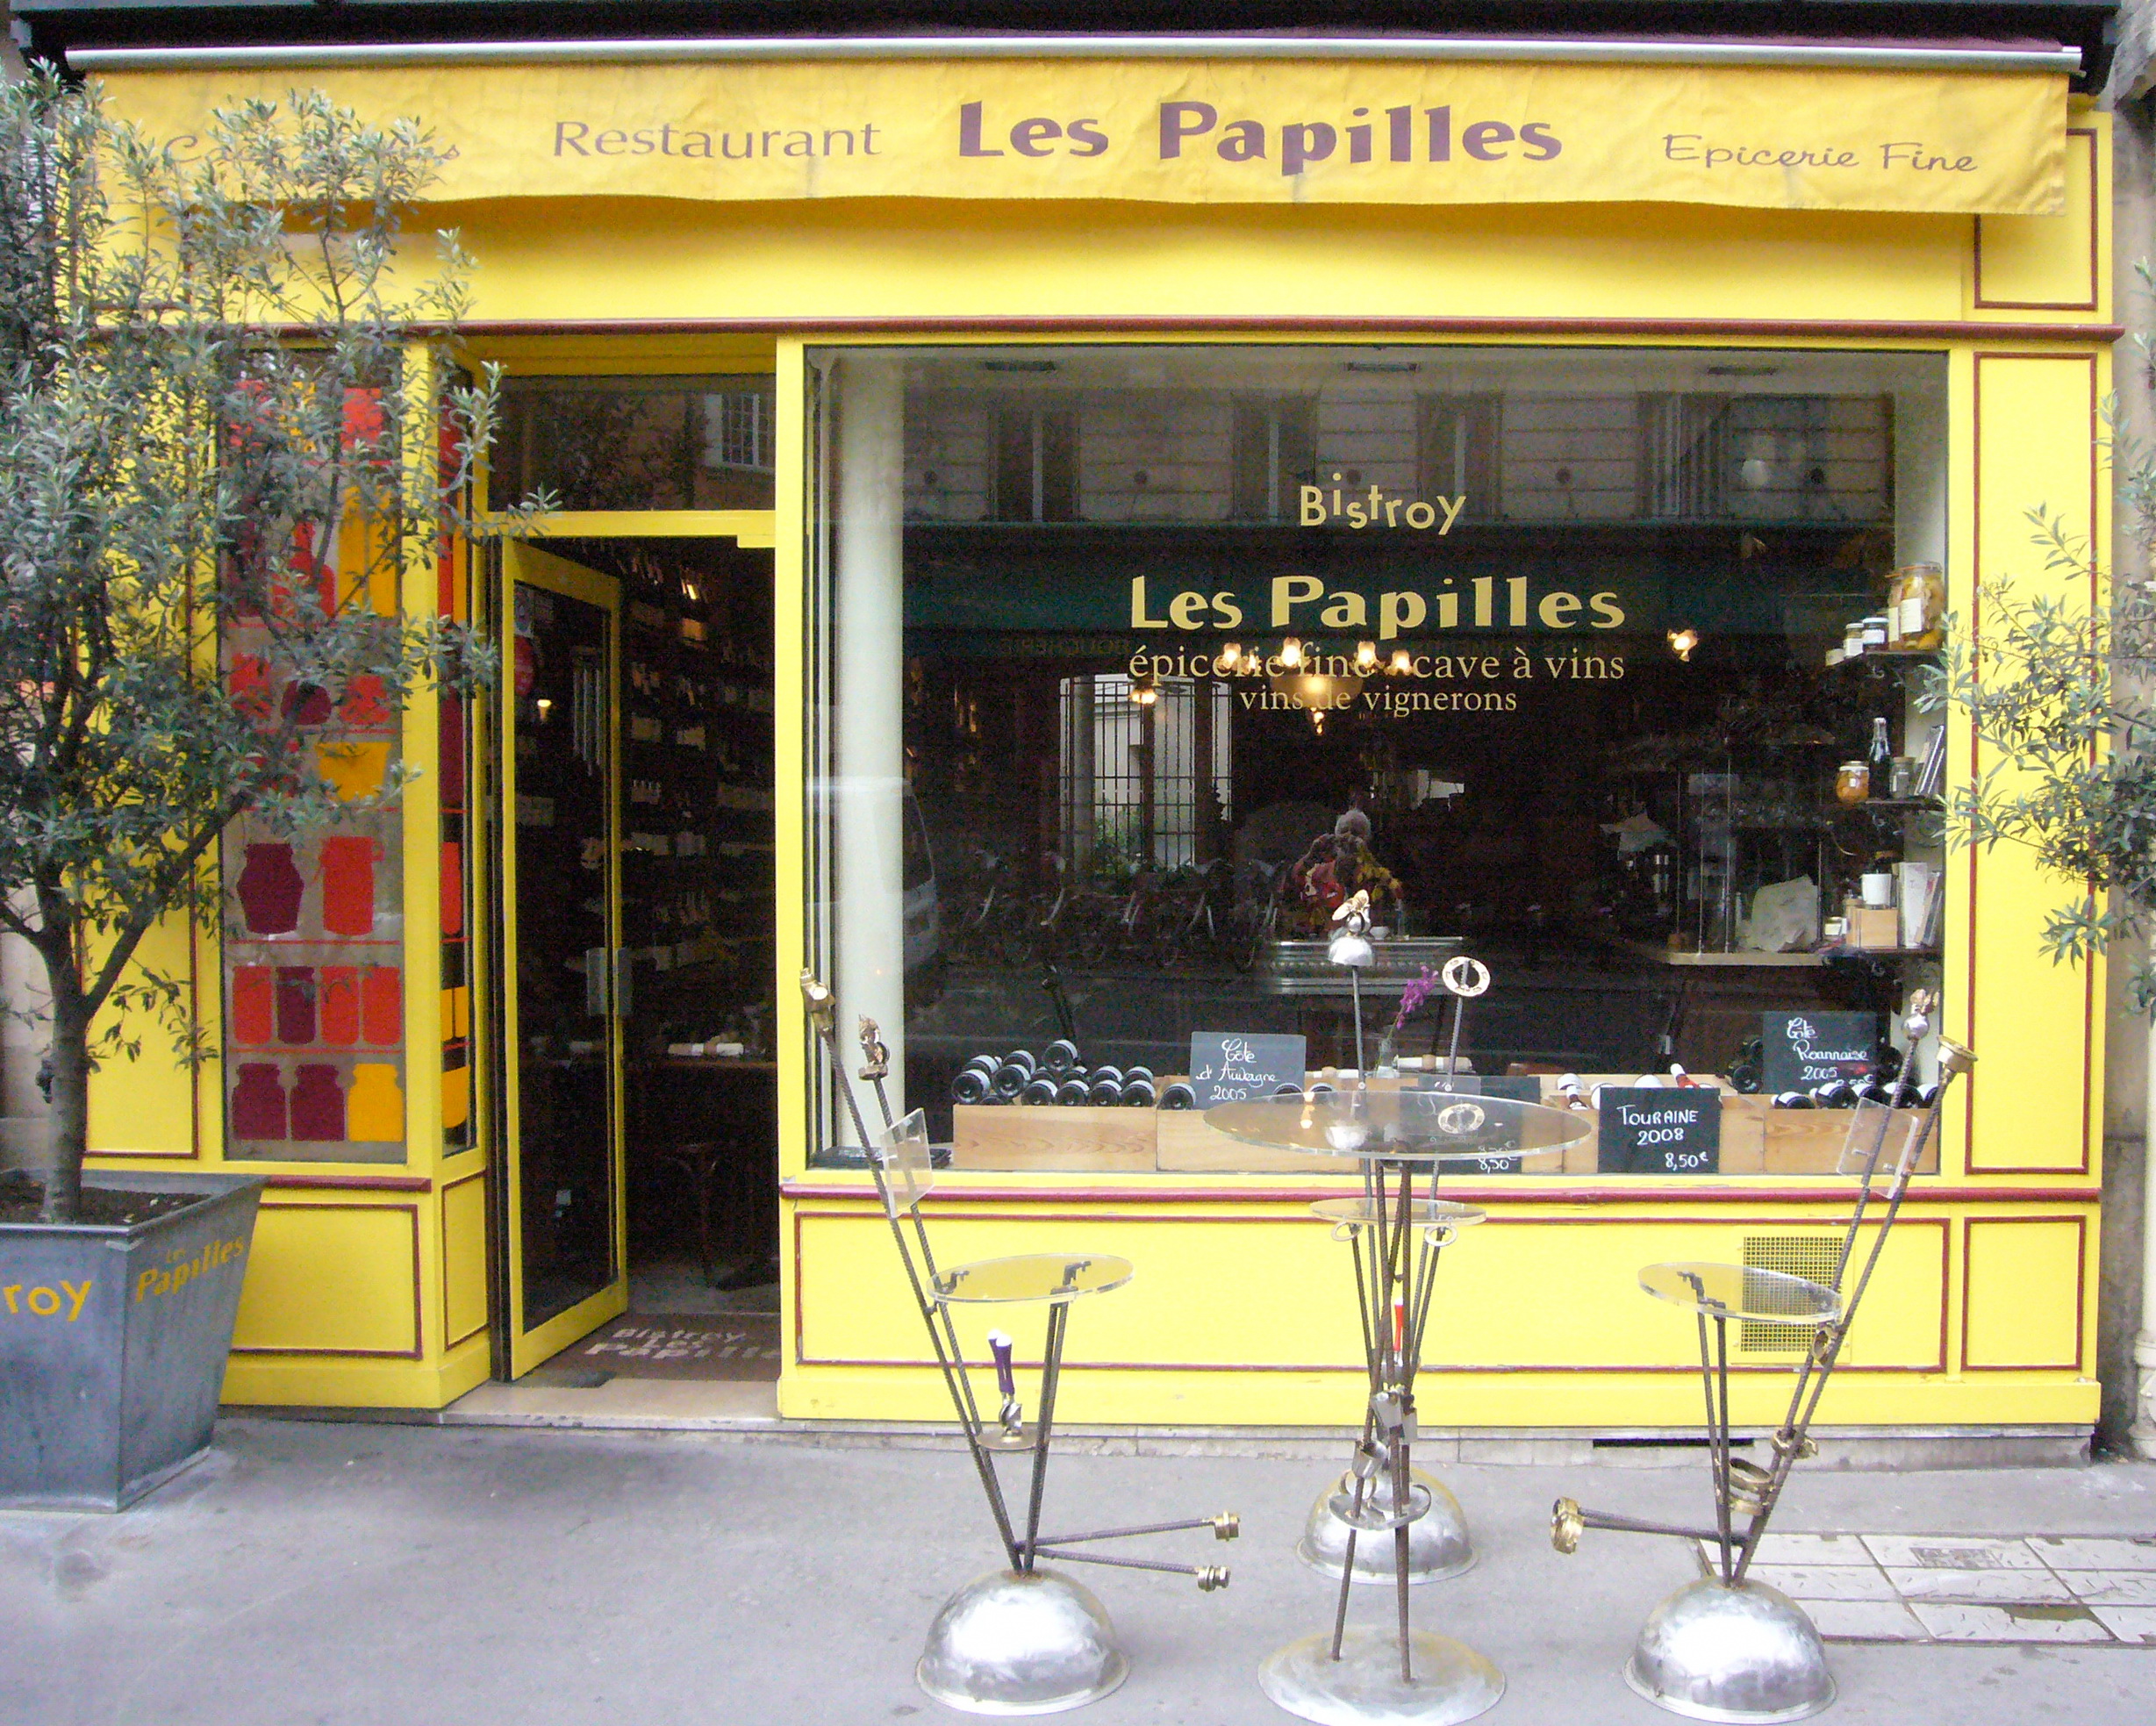 Whitings Writings - Les Papilles